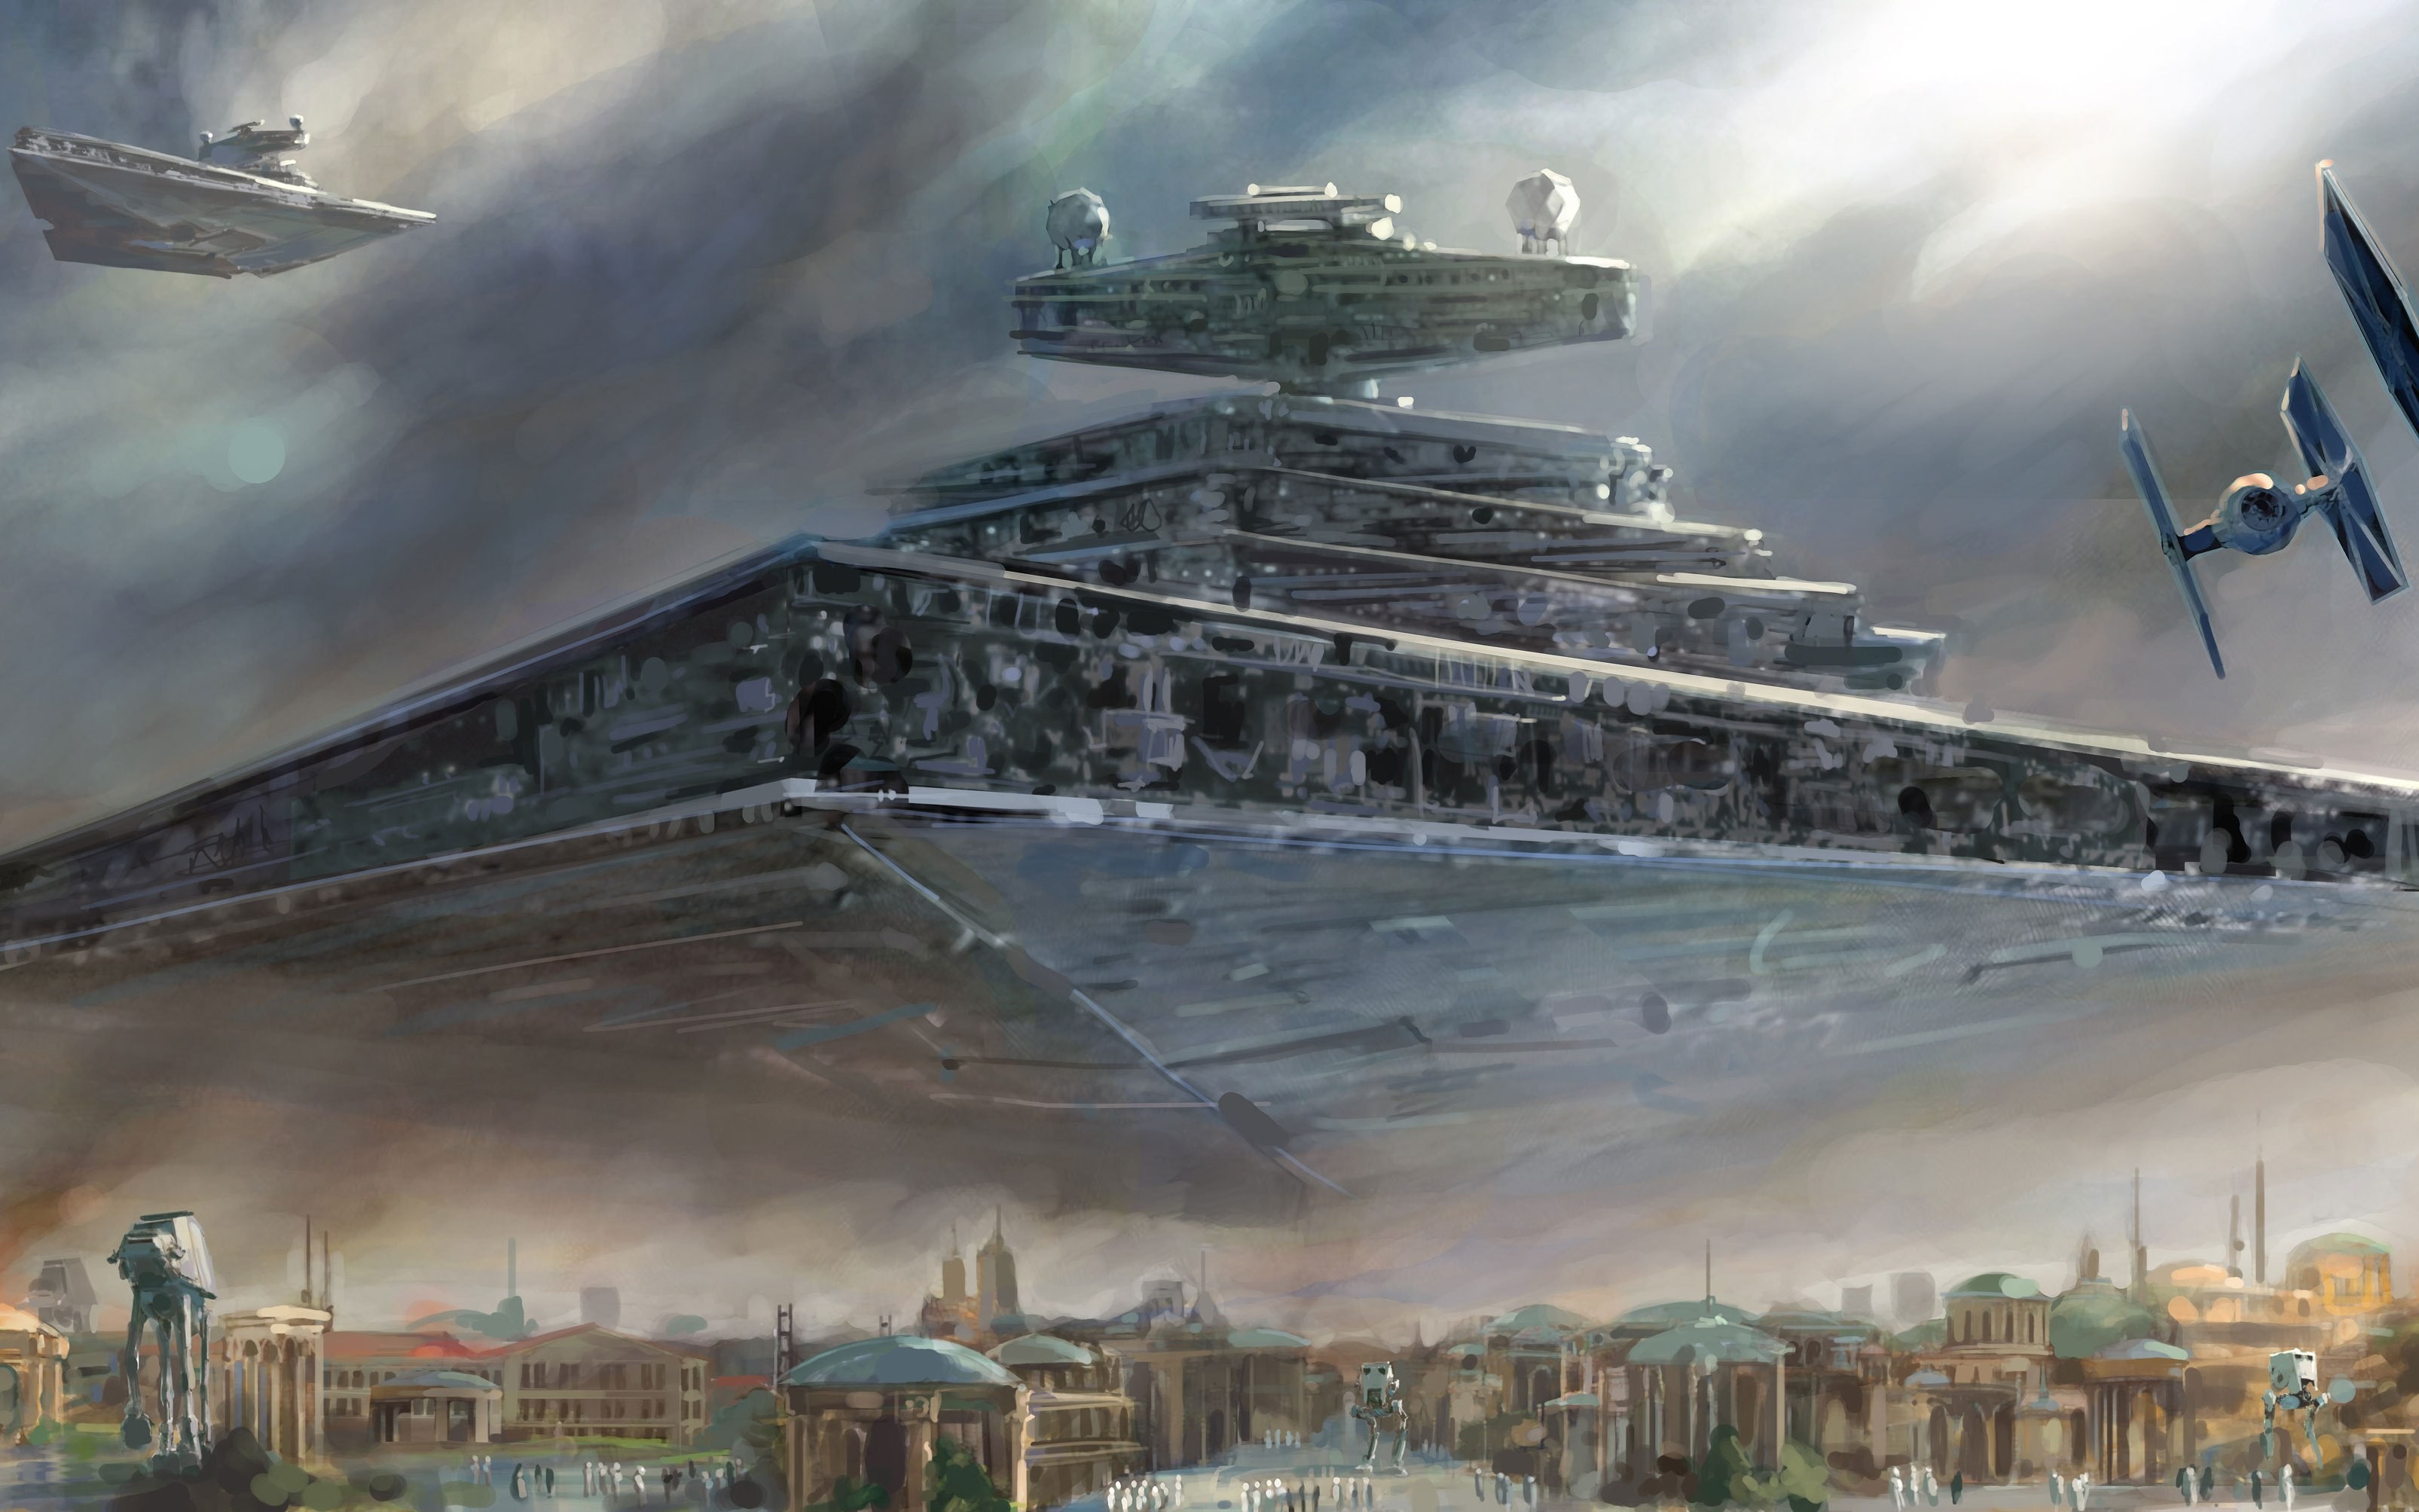 Star Wars Star Destroyer Spaceship TiE Fighter Painting Star Wars Ships Naboo Imperial Forces Scienc 3211x2007